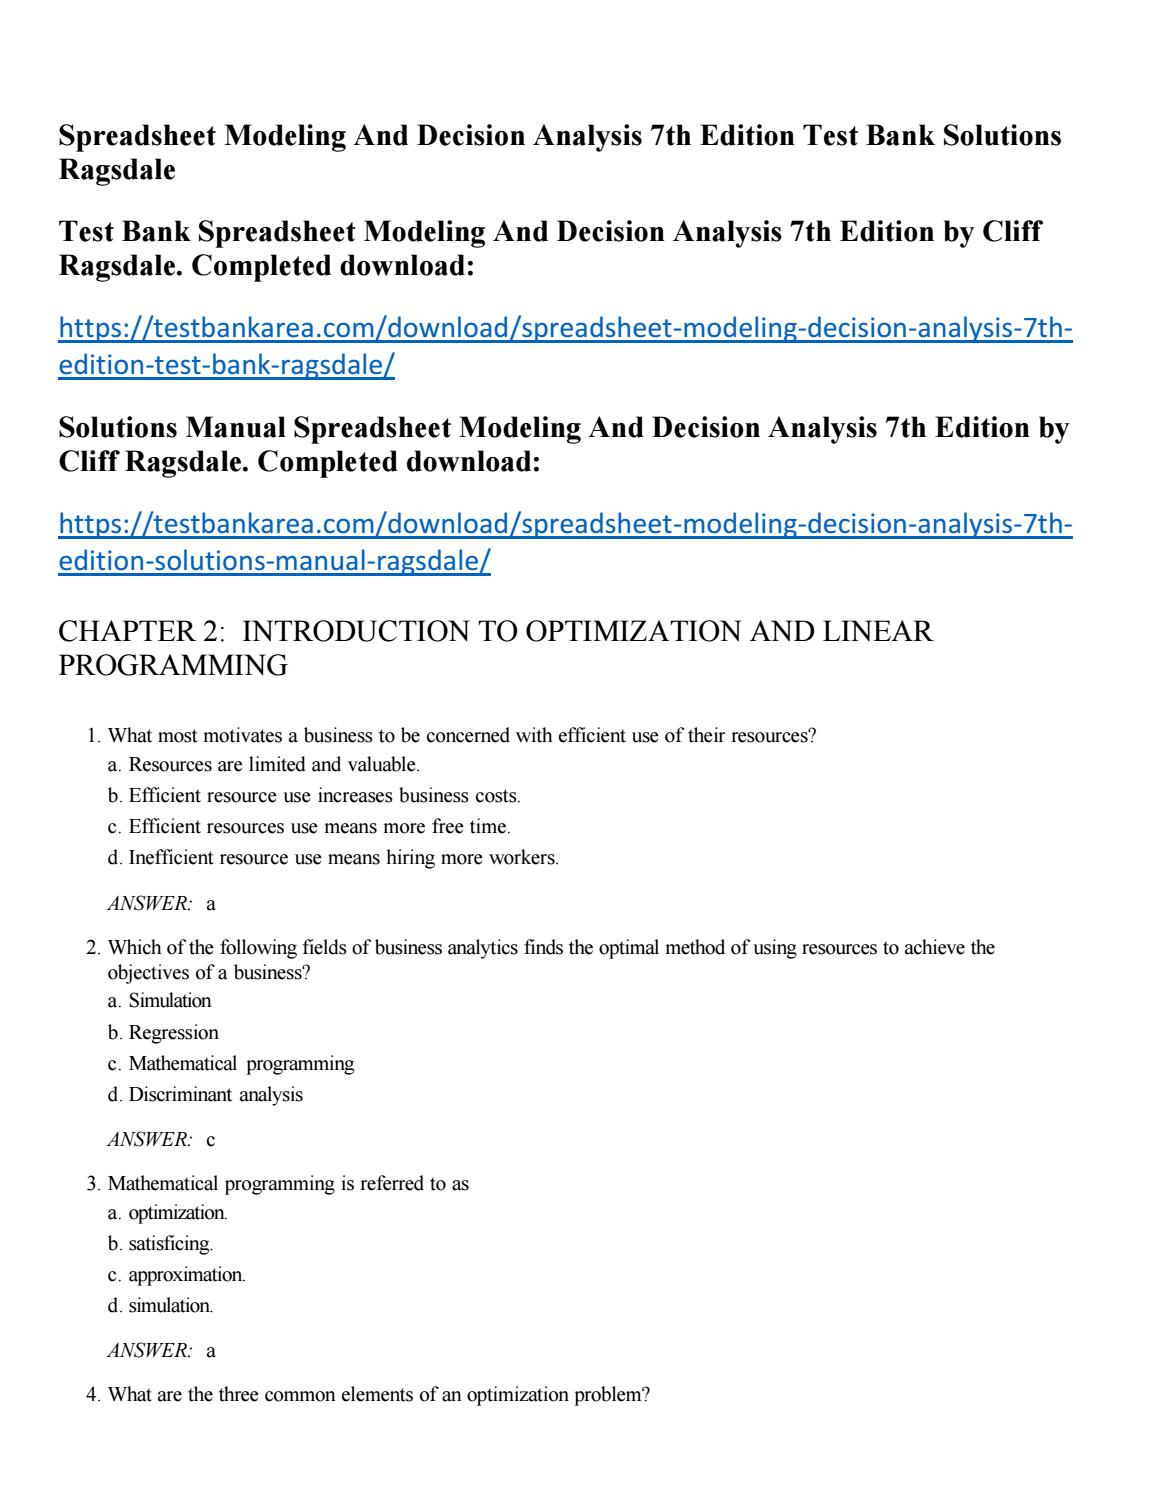 Spreadsheet Modeling And Decision Analysis Solutions Manual Free Pertaining To Spreadsheet Modeling And Decision Analysis 7Th Edition Test Bank